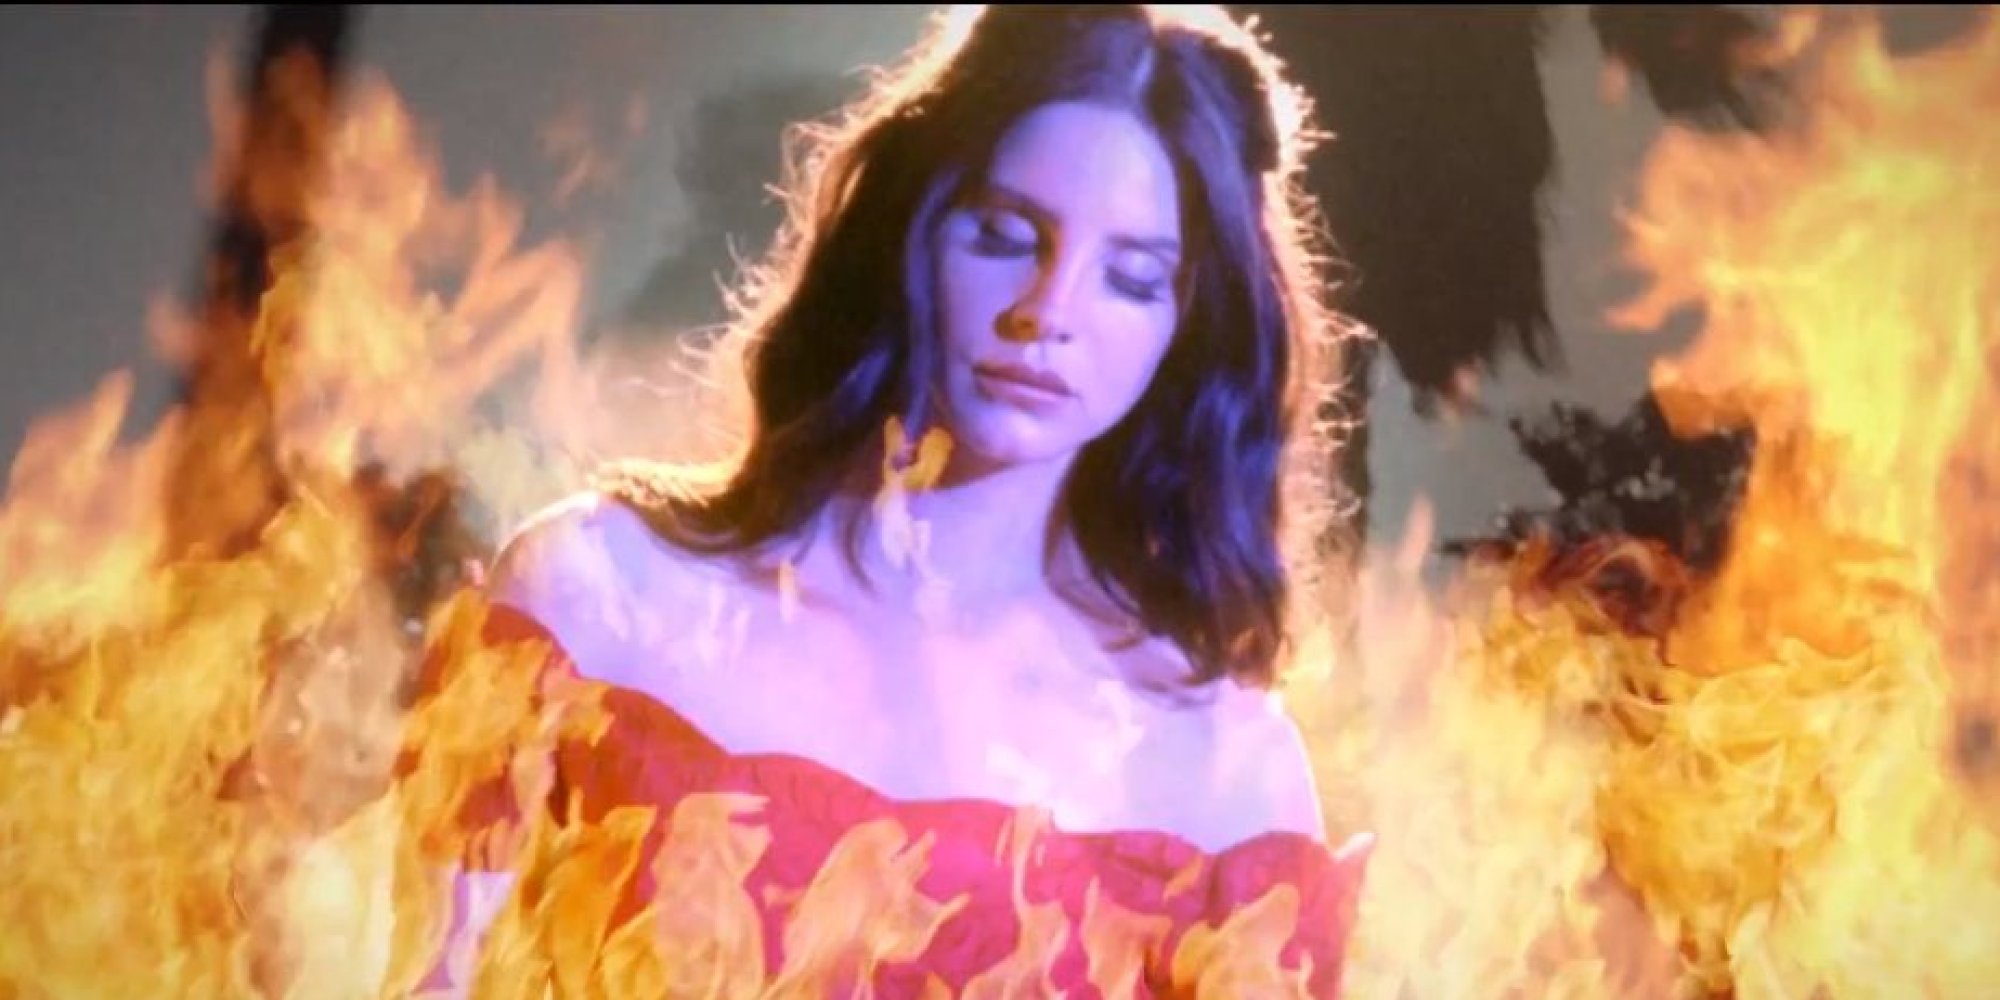 MUSIC MINUTE} You've Got the Music in You.. . Don't You? Lana Del Rey's Visions of the “West Coast”